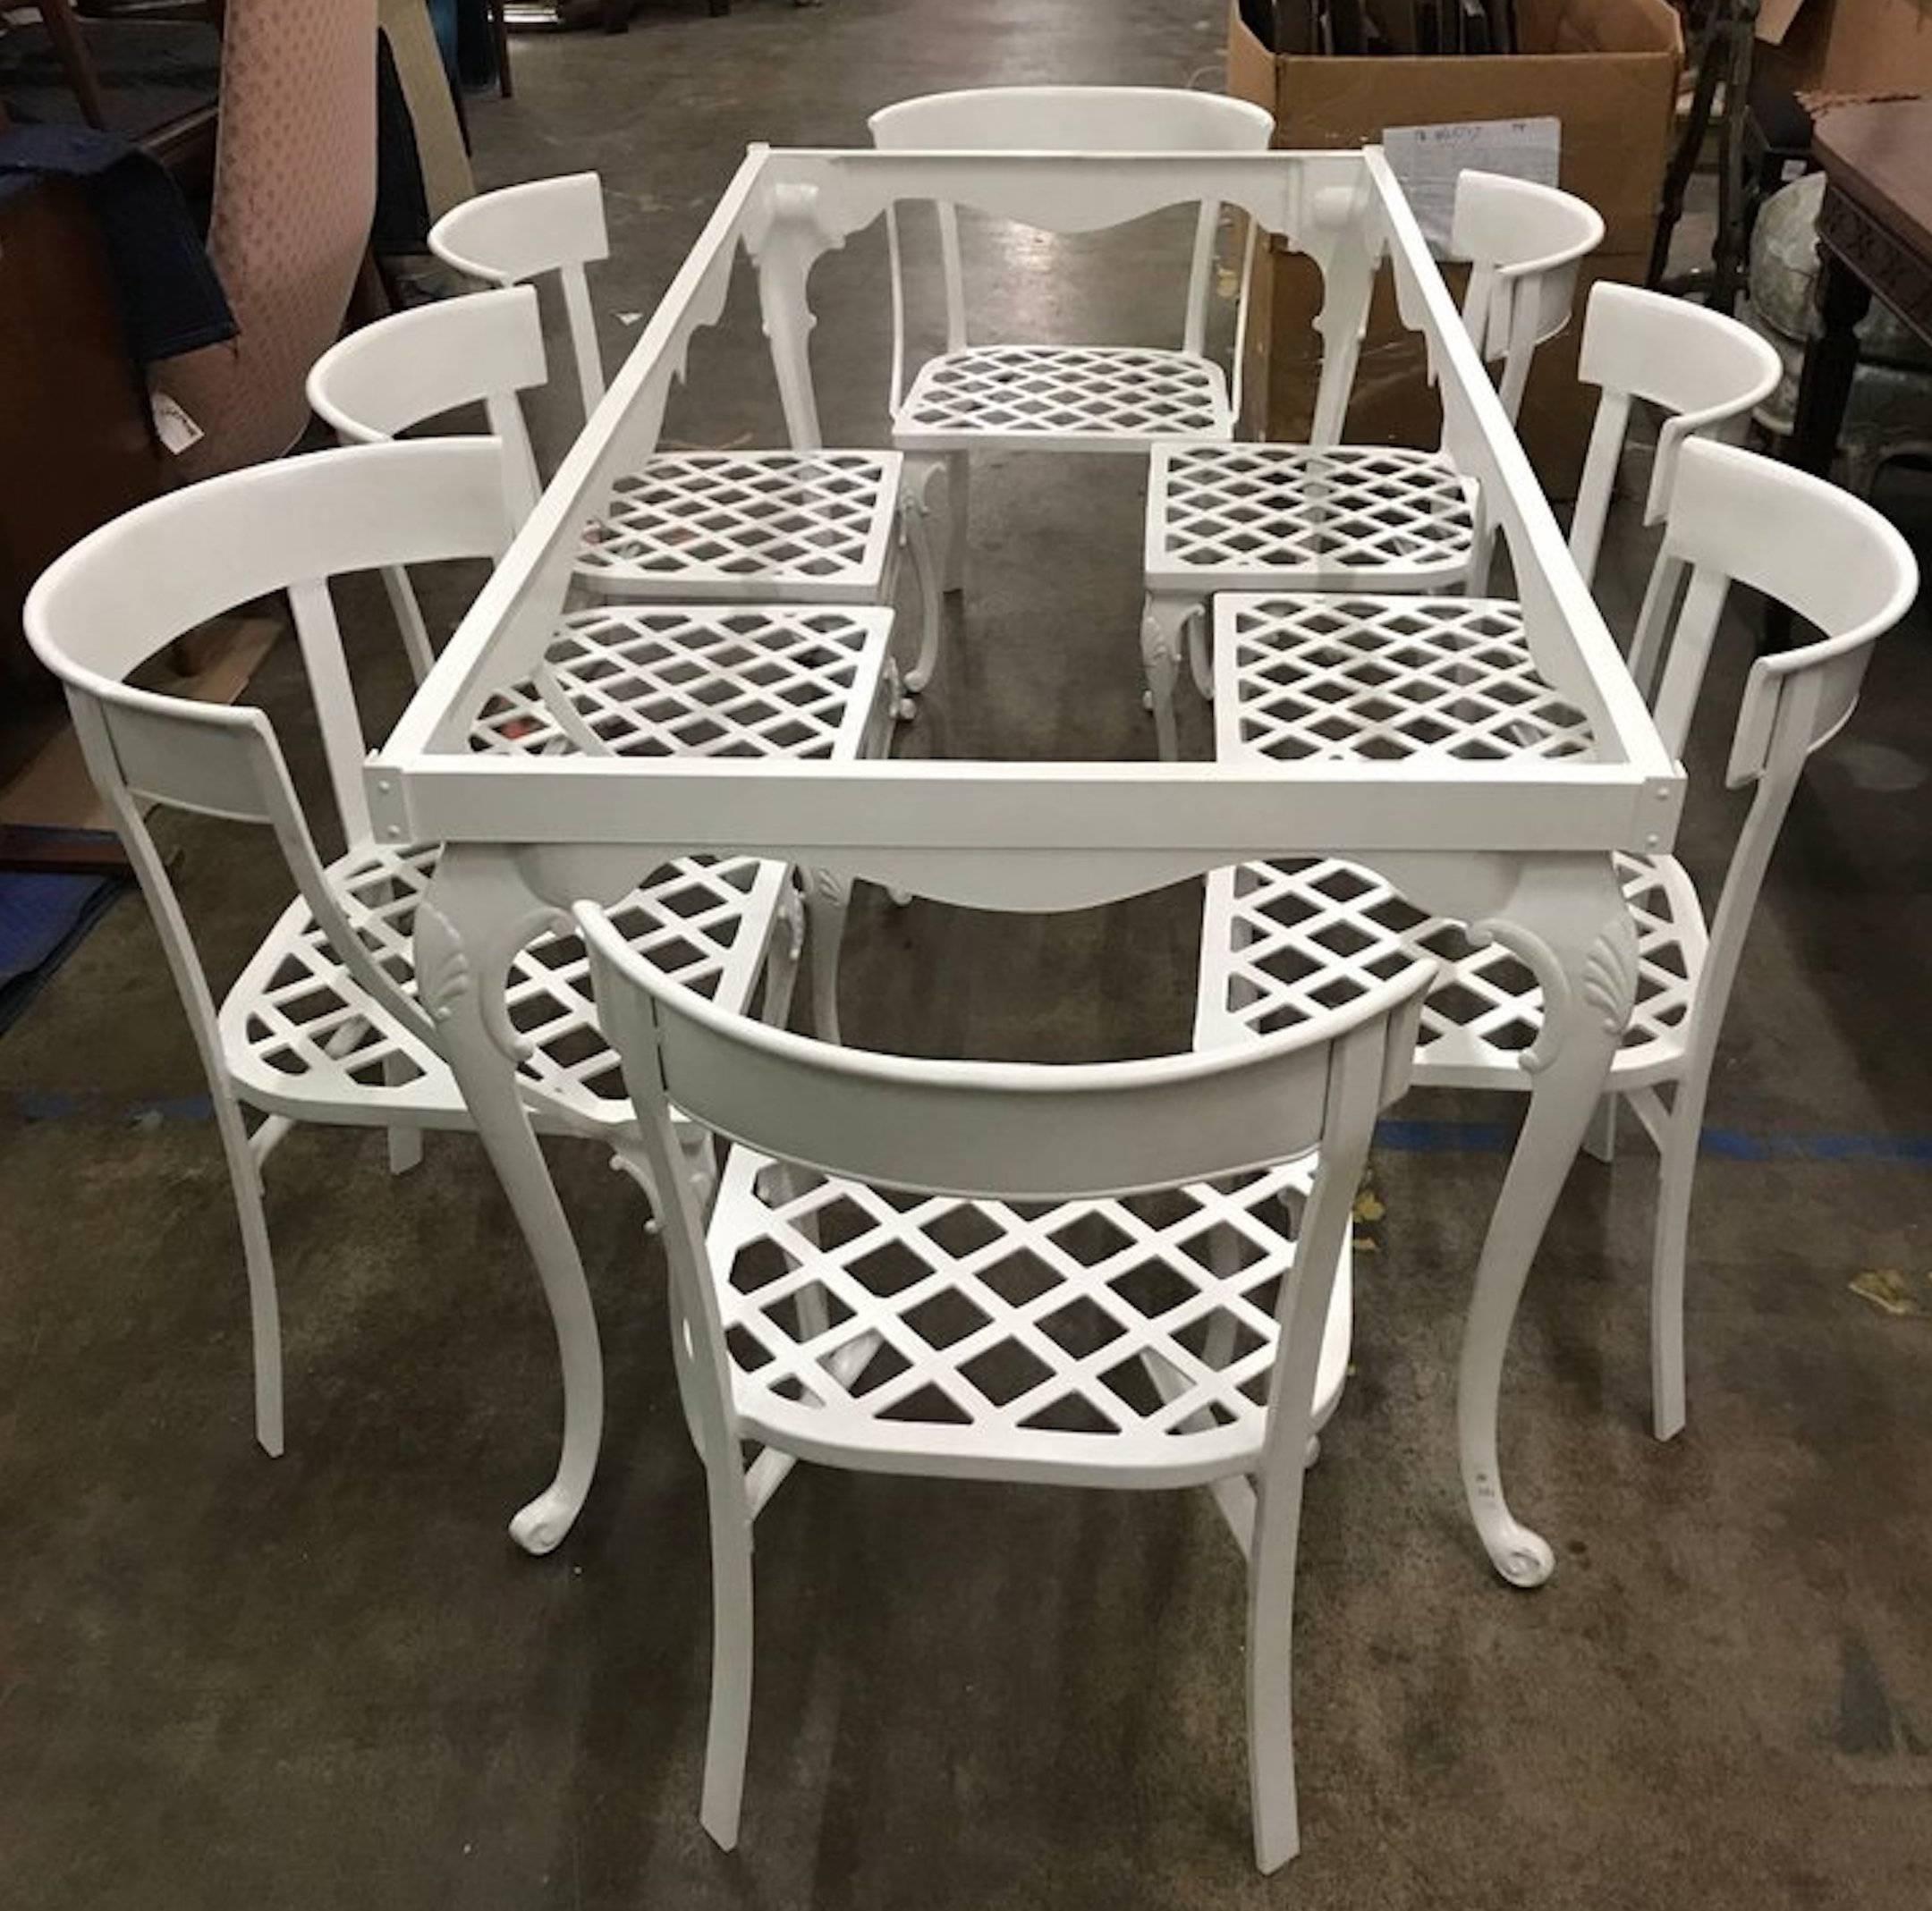 Klismos Patio set for eight, in the style of Billy Haines, restored
Newly enameled white cast aluminium
Consisting of:
Measure: One 72